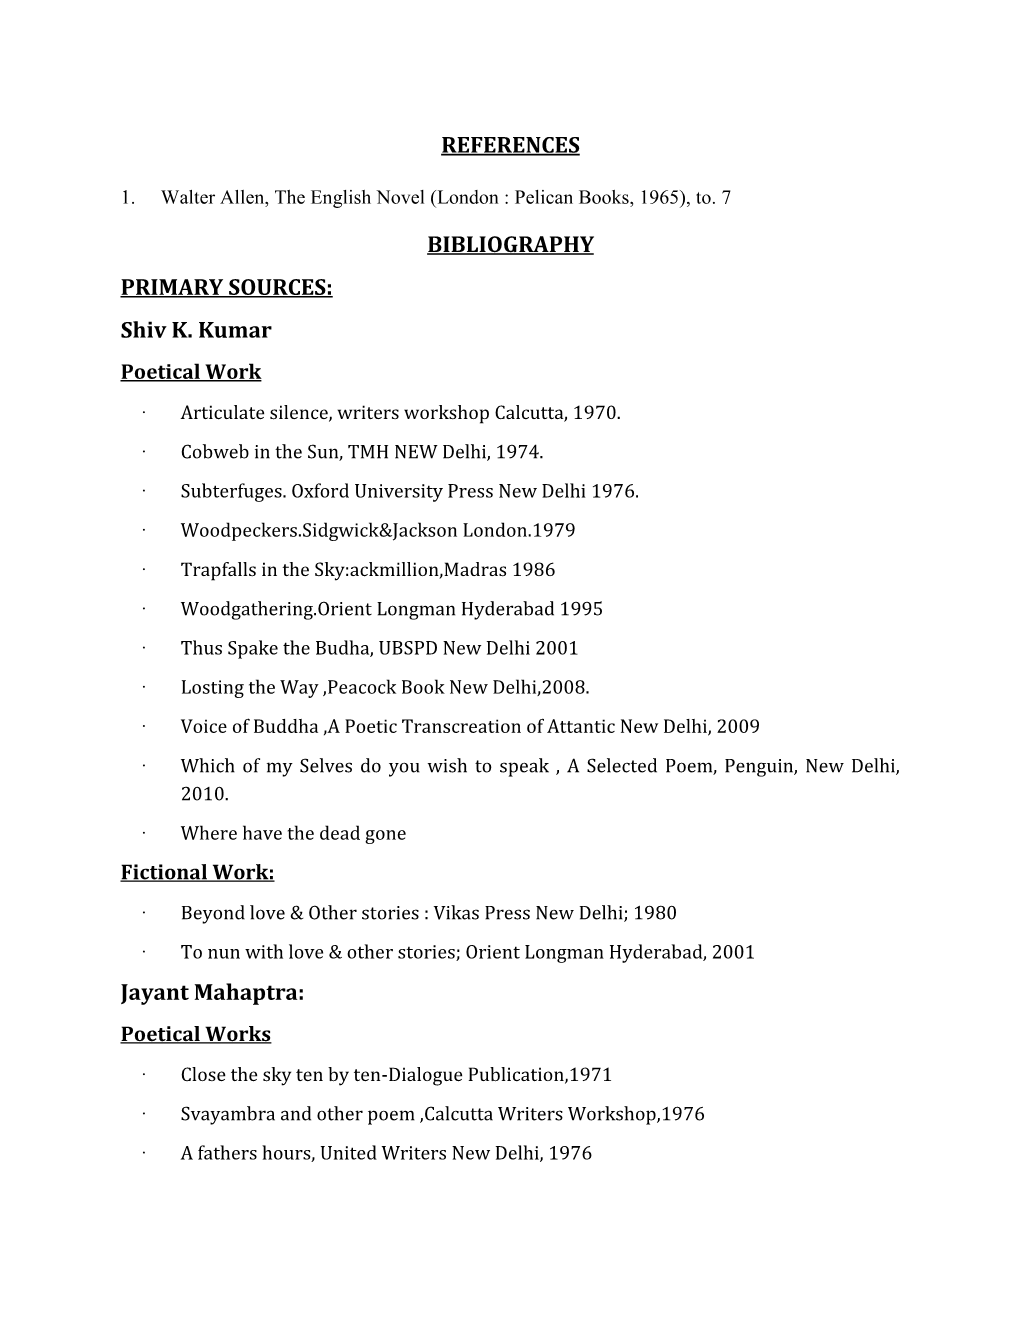 BIBLIOGRAPHY PRIMARY SOURCES: Shiv K. Kumar Poetical Work 